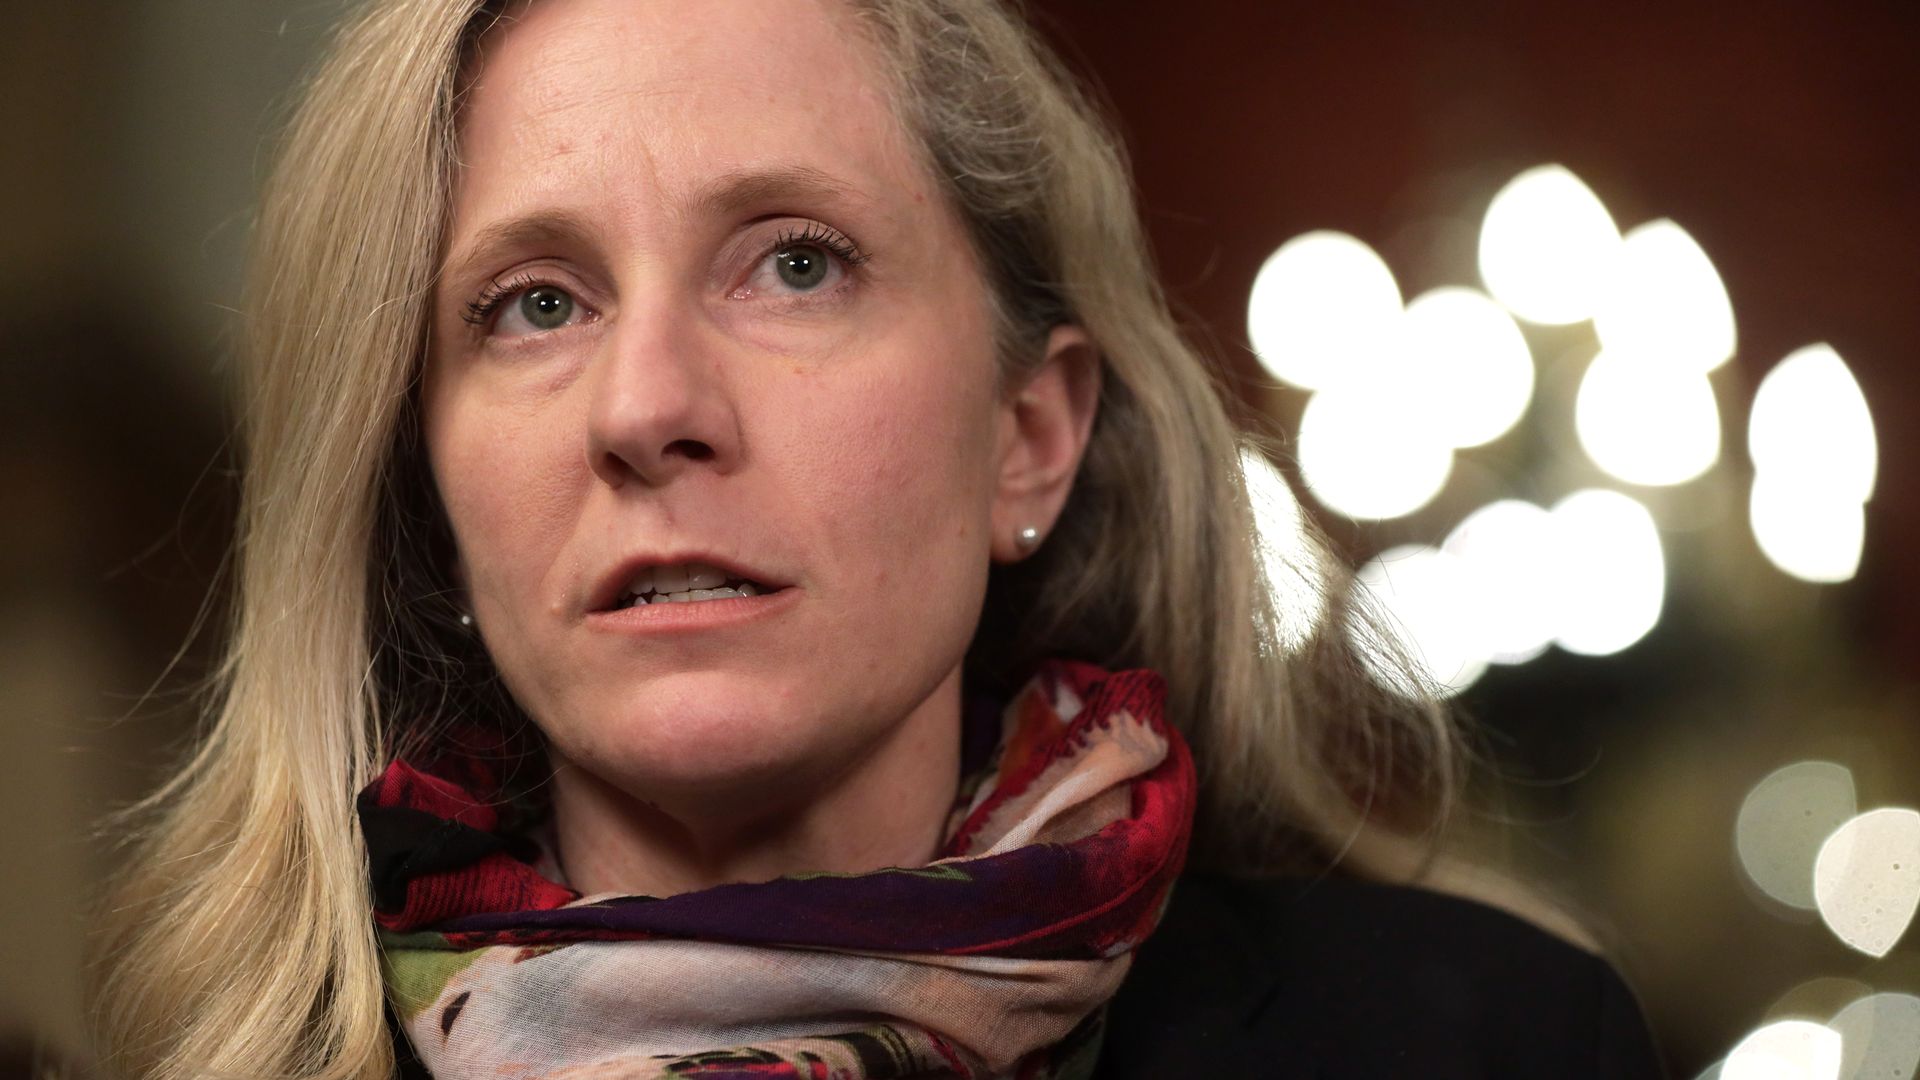 Rep. Abigail Spanberger is seen while speaking.